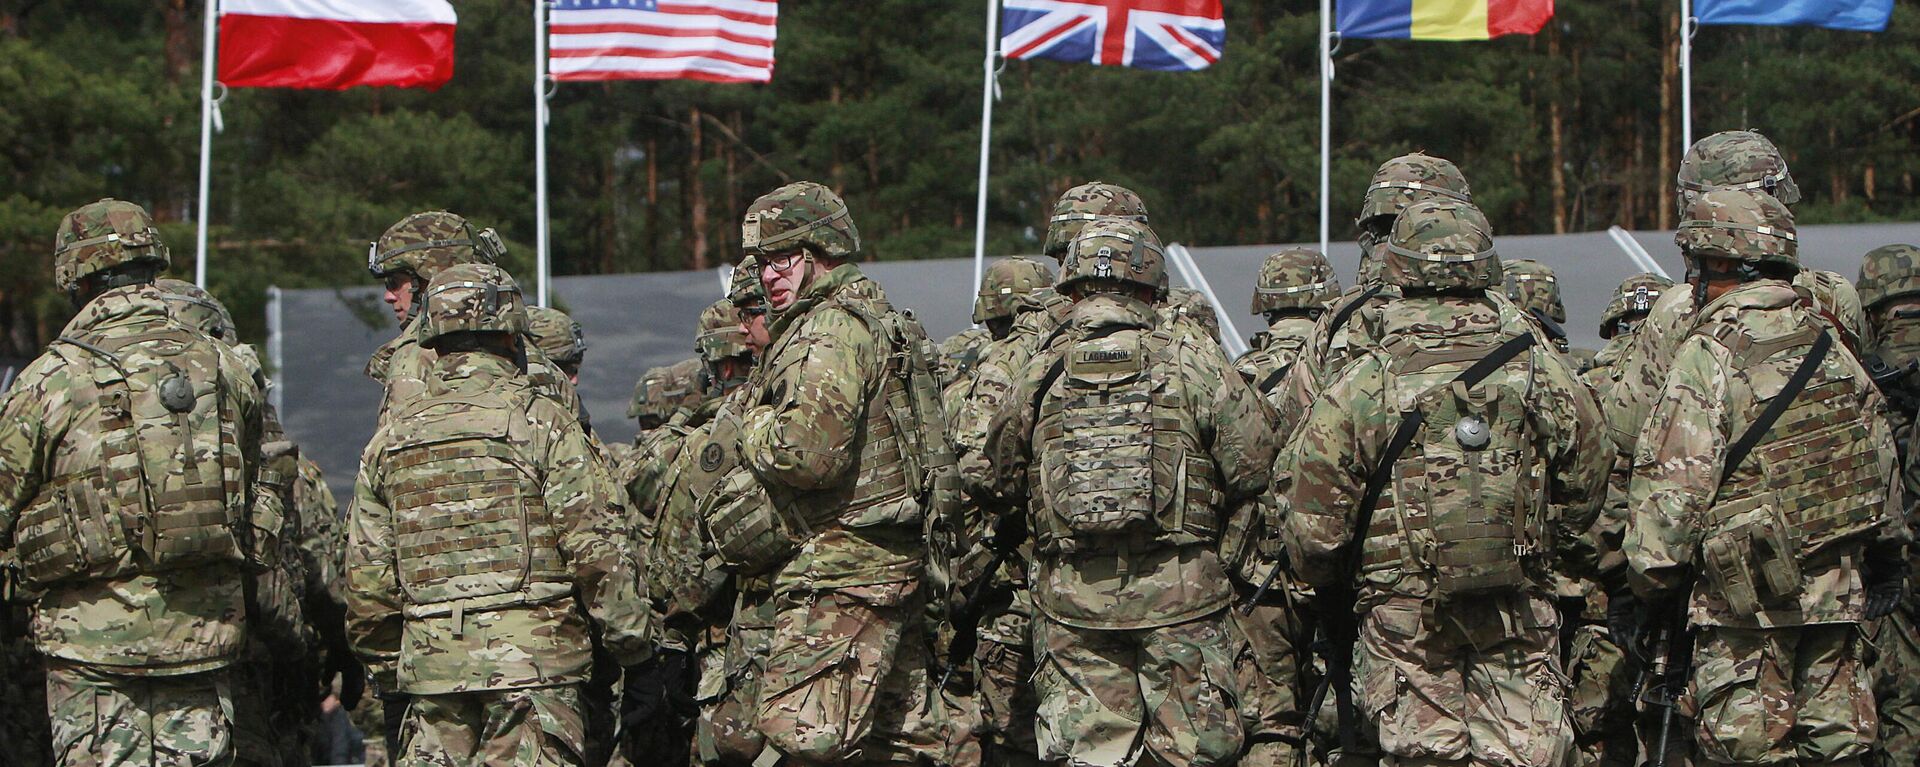 US troops, part of a NATO mission to enhance Poland's defence, are getting ready for an official welcoming ceremony in Orzysz, northeastern Poland, Thursday, April 13, 2017 - Sputnik International, 1920, 26.02.2024